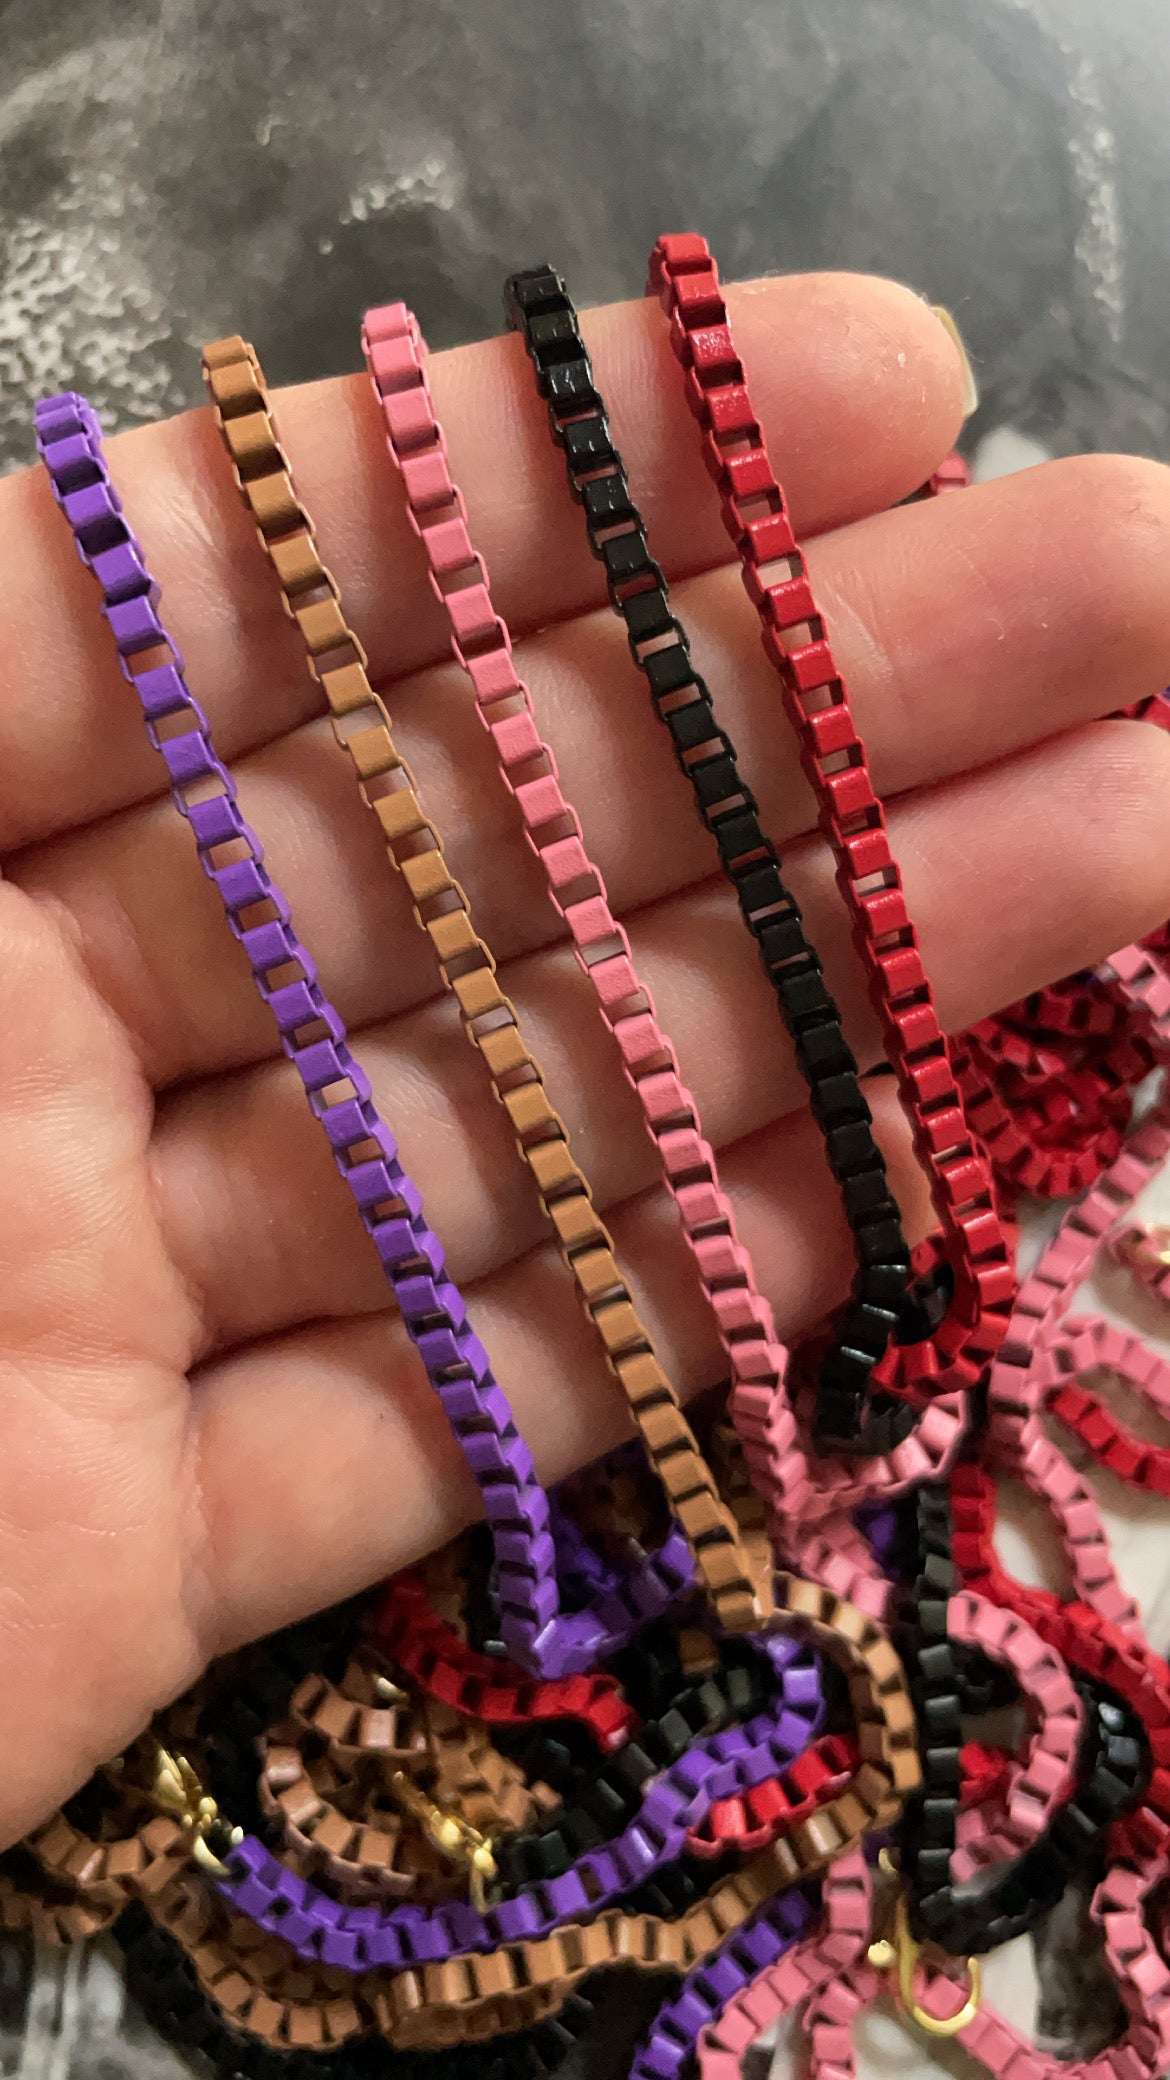 Colored Necklaces